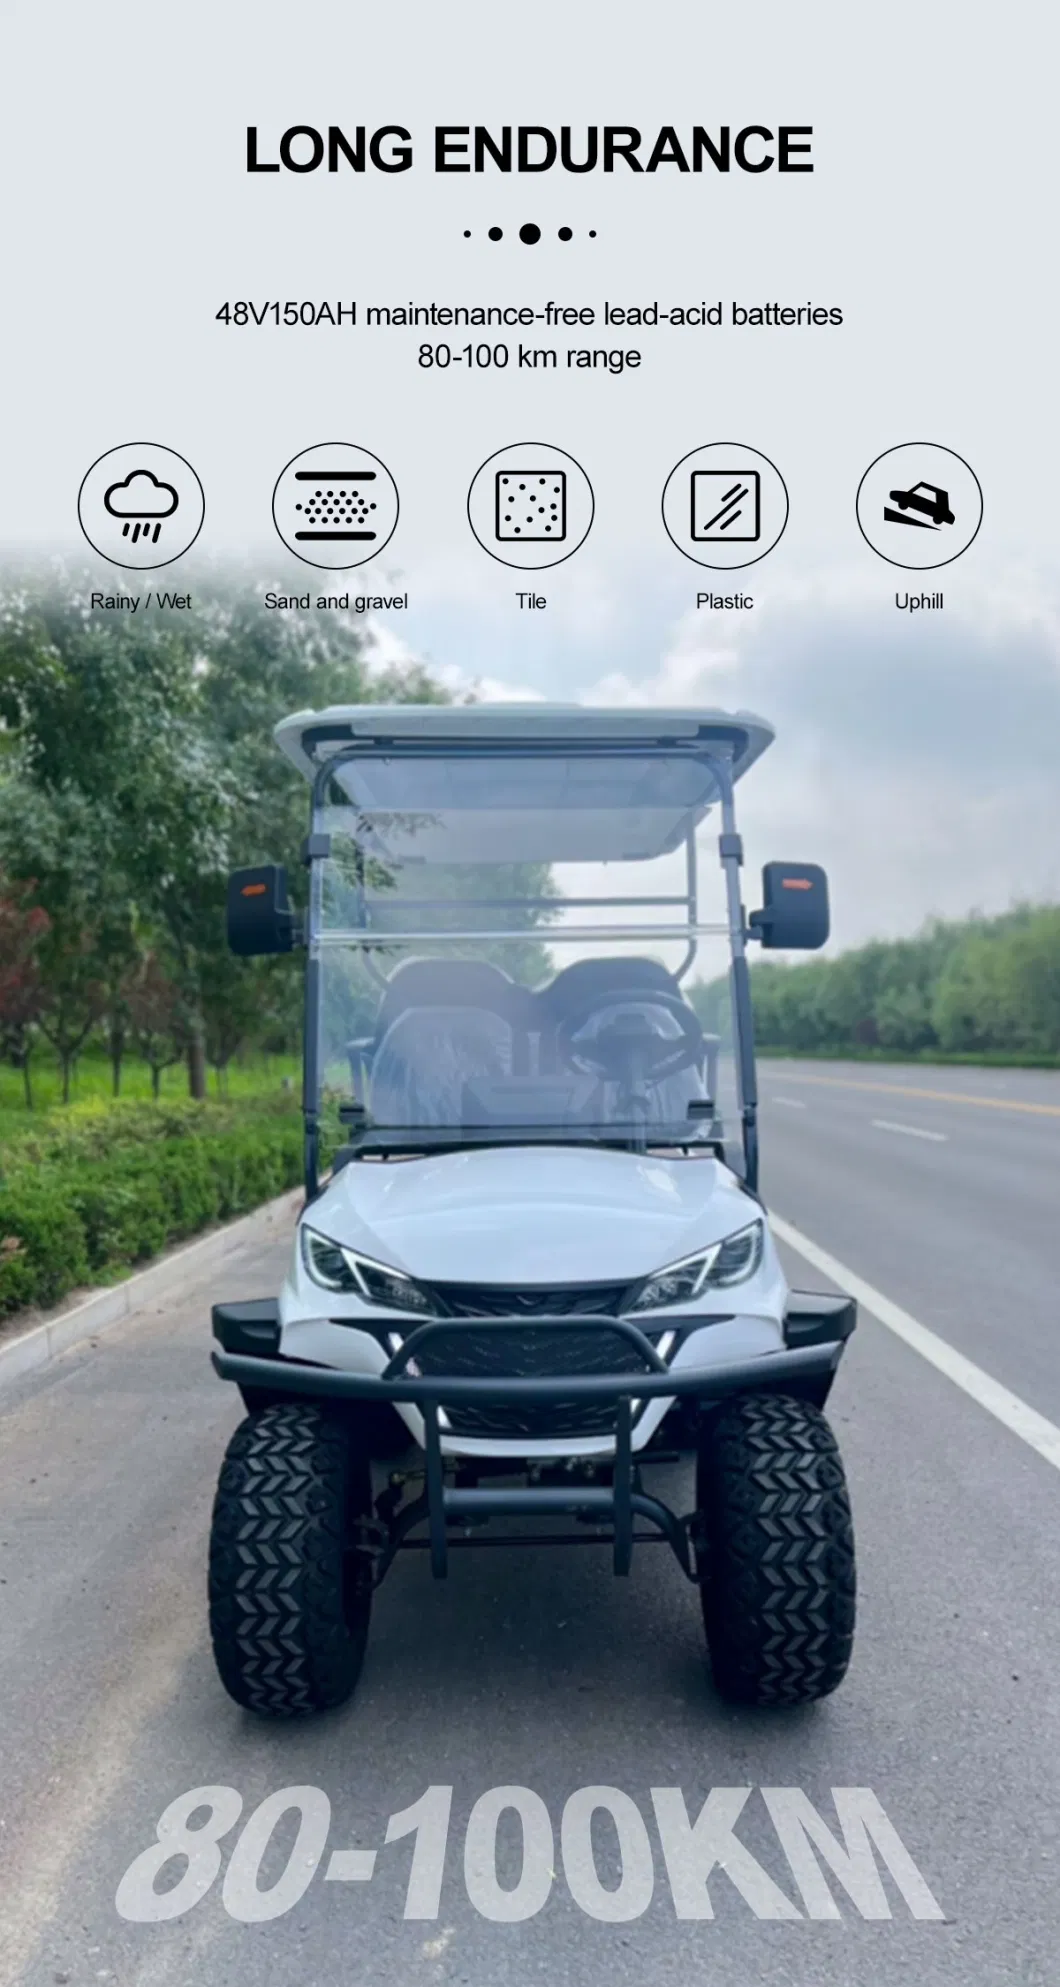 Cool Advanced EV Four Seater 4 Wheel Road Legal Lsv Electric Golf Carts for Sale